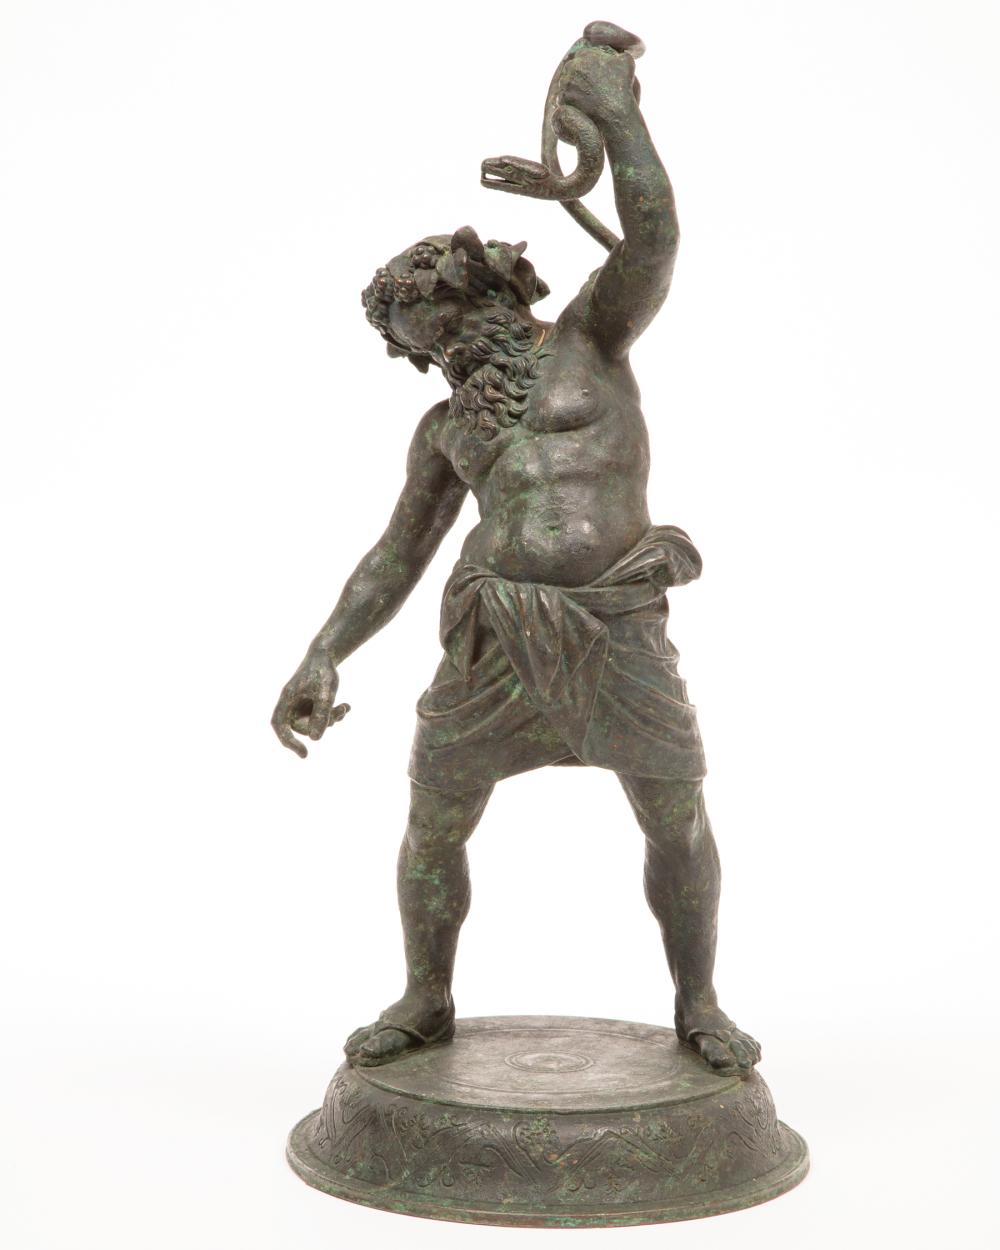 METAL SCULPTURE OF THE POMPEIAN